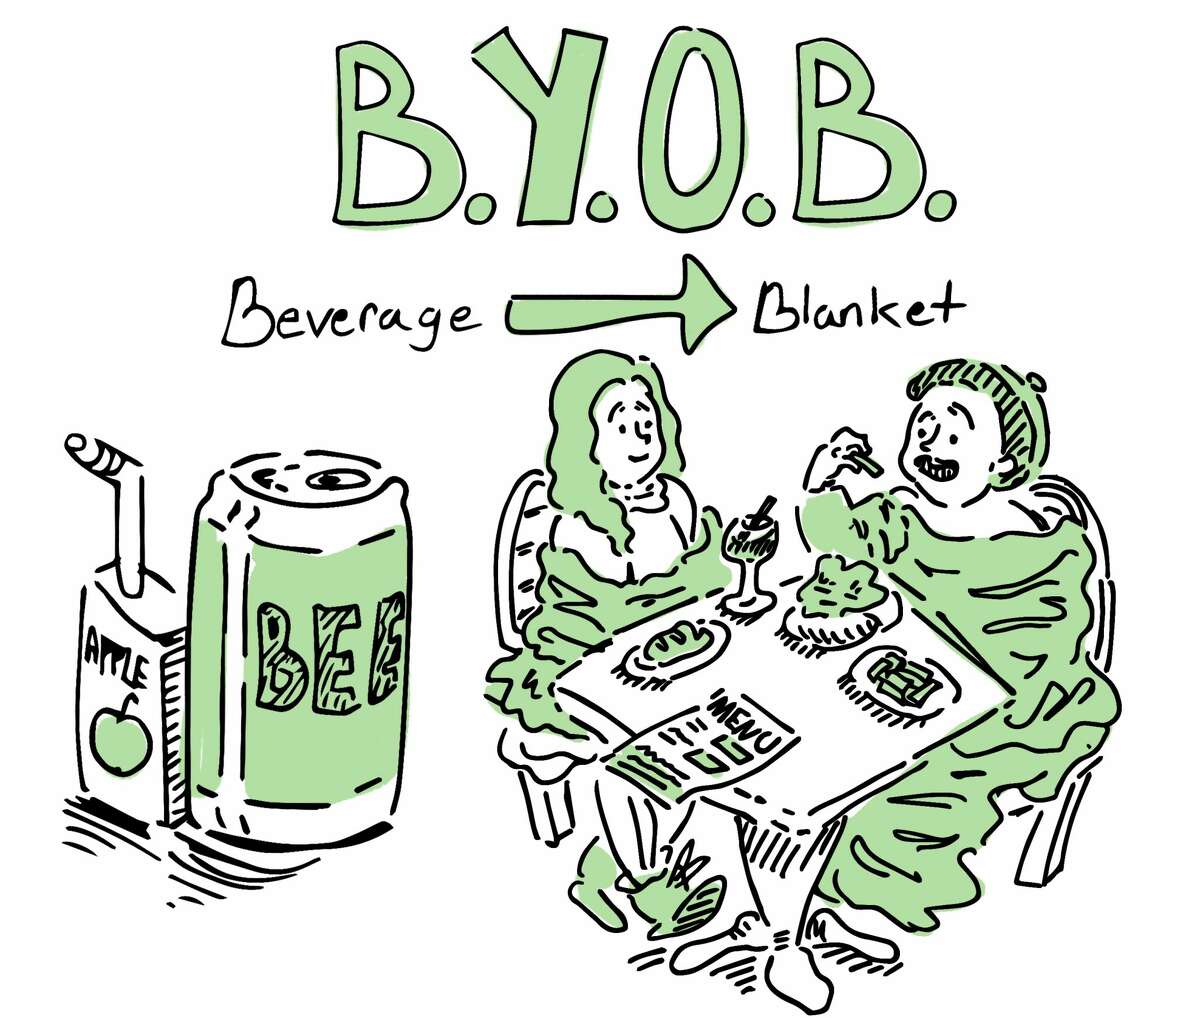 B.Y.O.B.: Used to mean Bring Your Own Beverage, now means Bring Your Own Blanket.